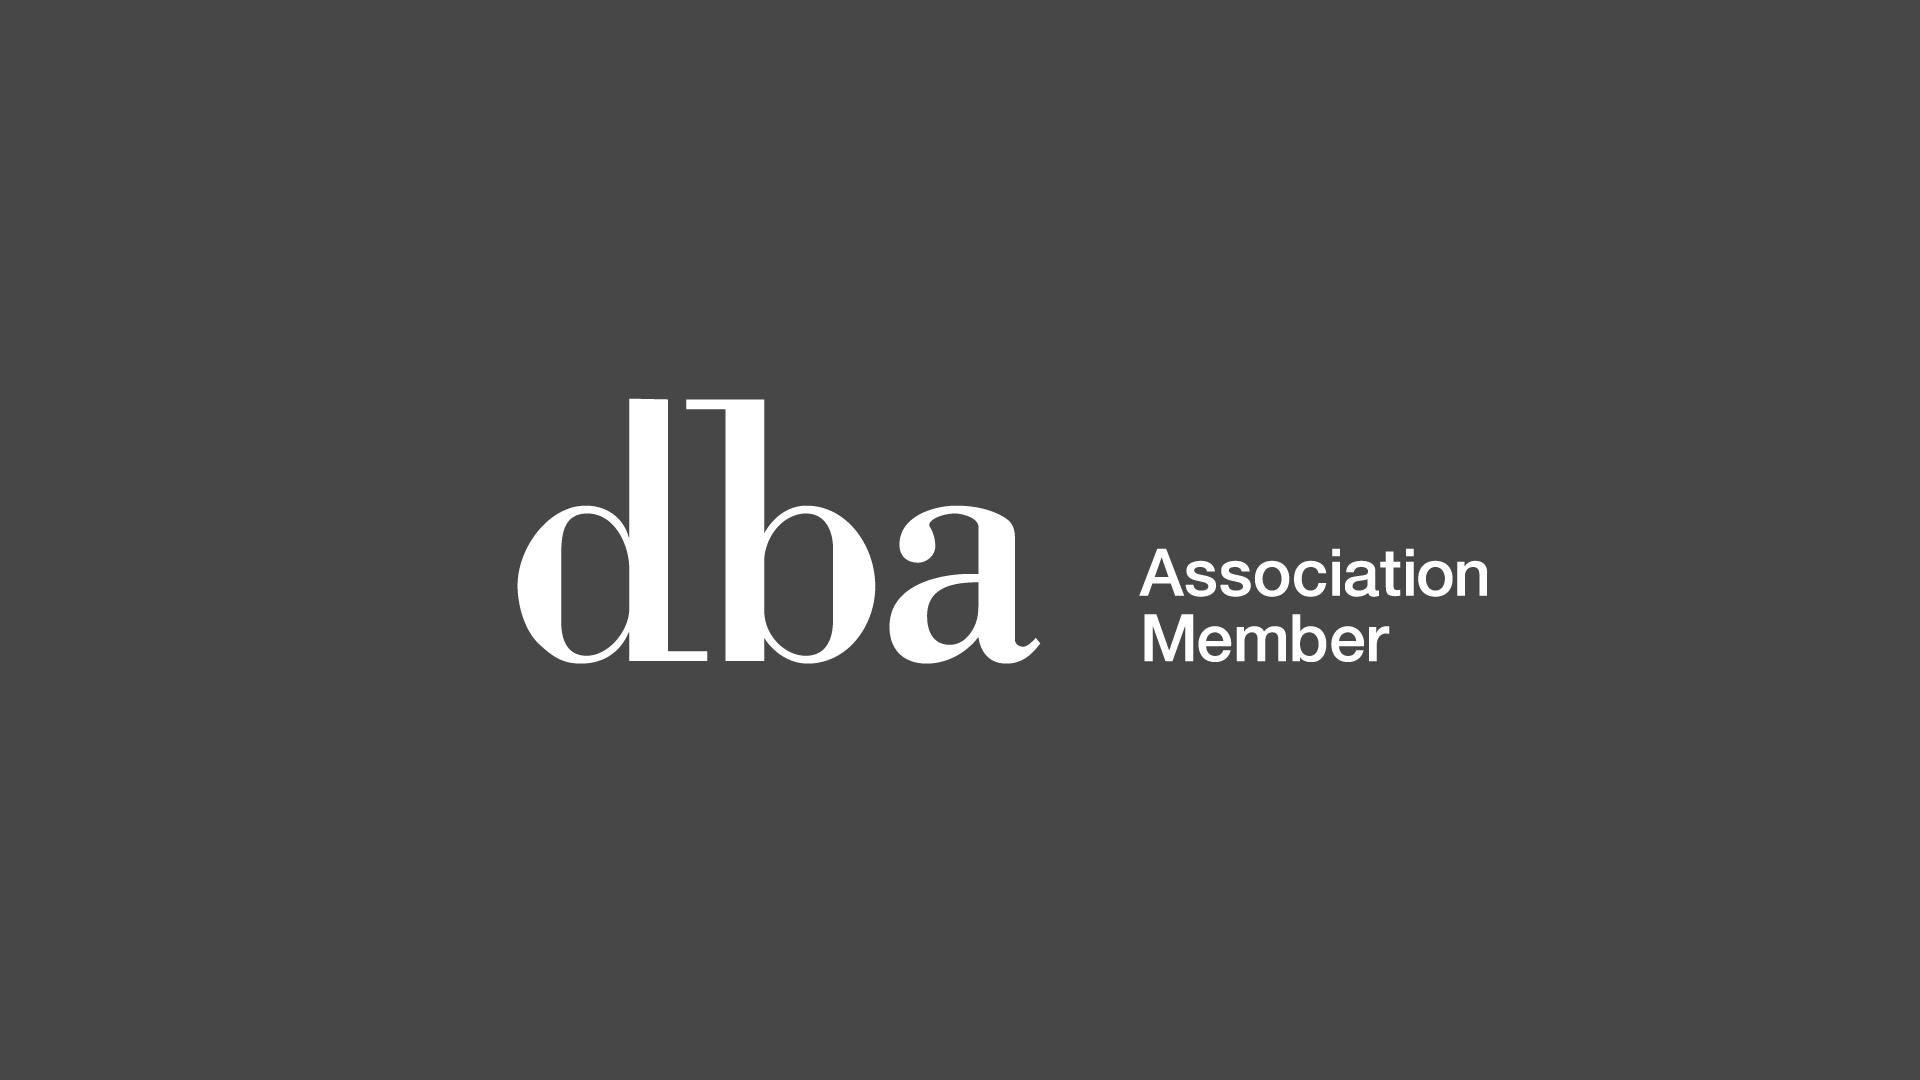 DBA Logo - Meet one of the newest members of the Design Business Association ...